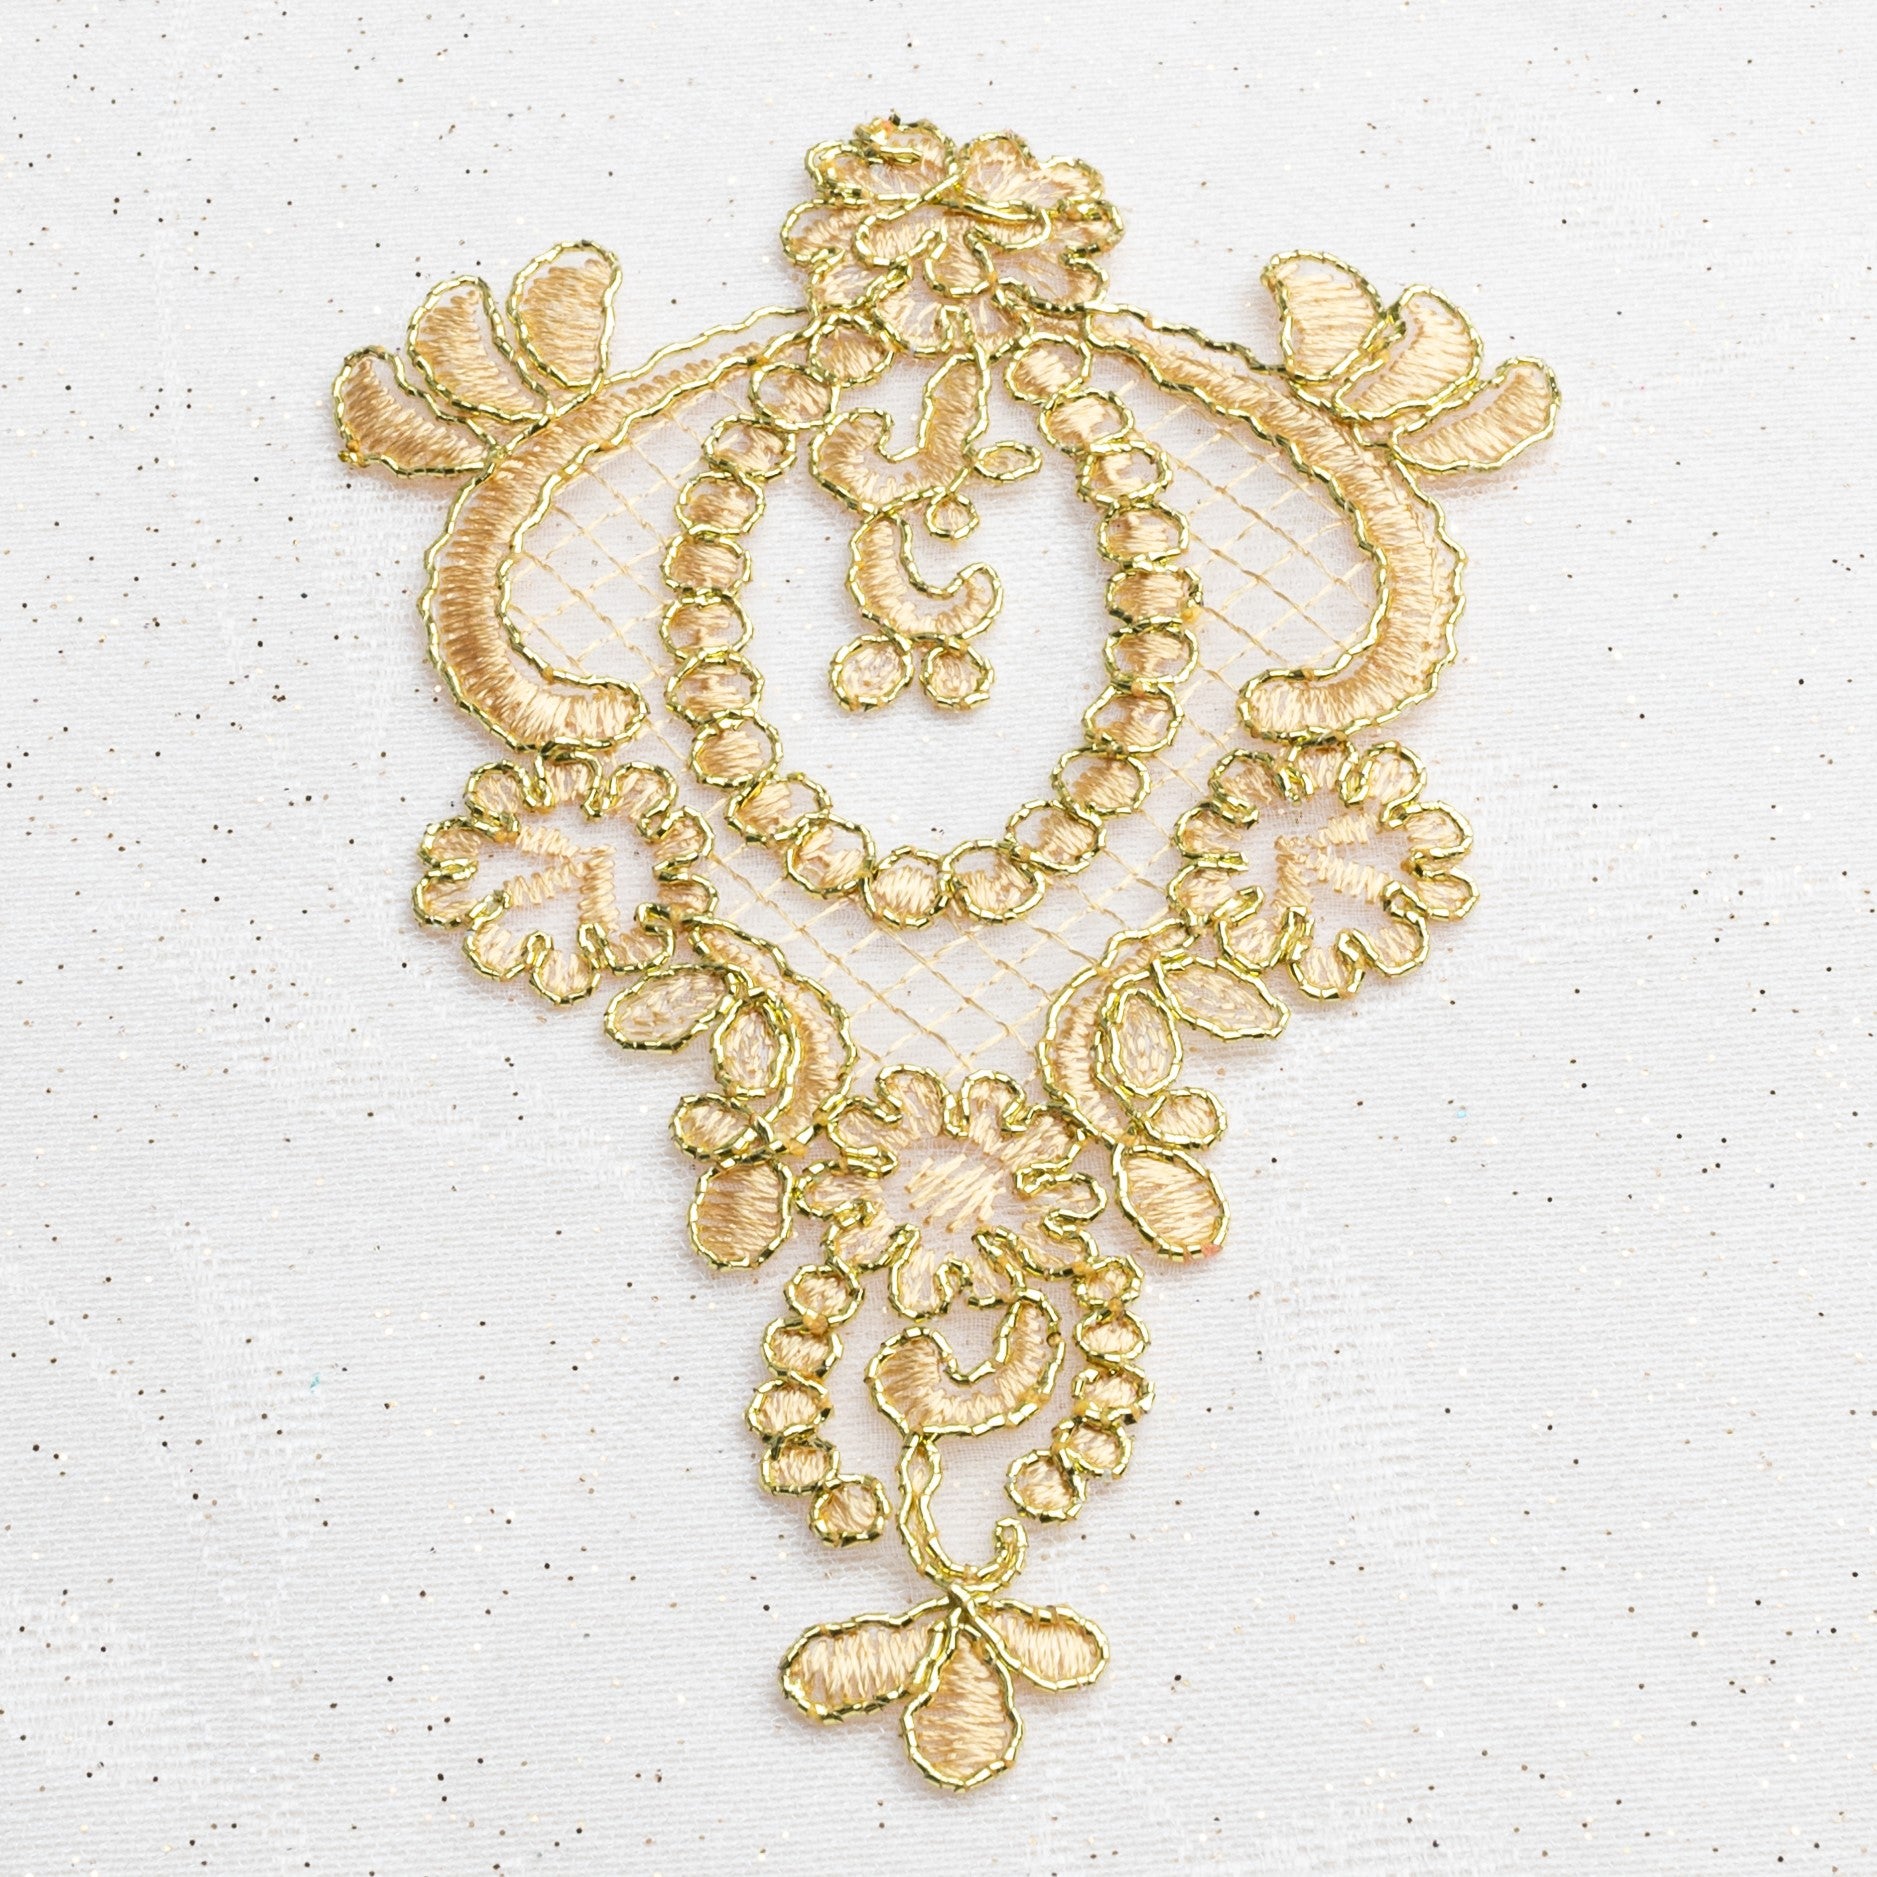 Single gold applique embroidered onto an organza backing and edged with bright gold cord.  A lovely applique for a ballet tutu bodice or skirt or for a boys military or royal costume.